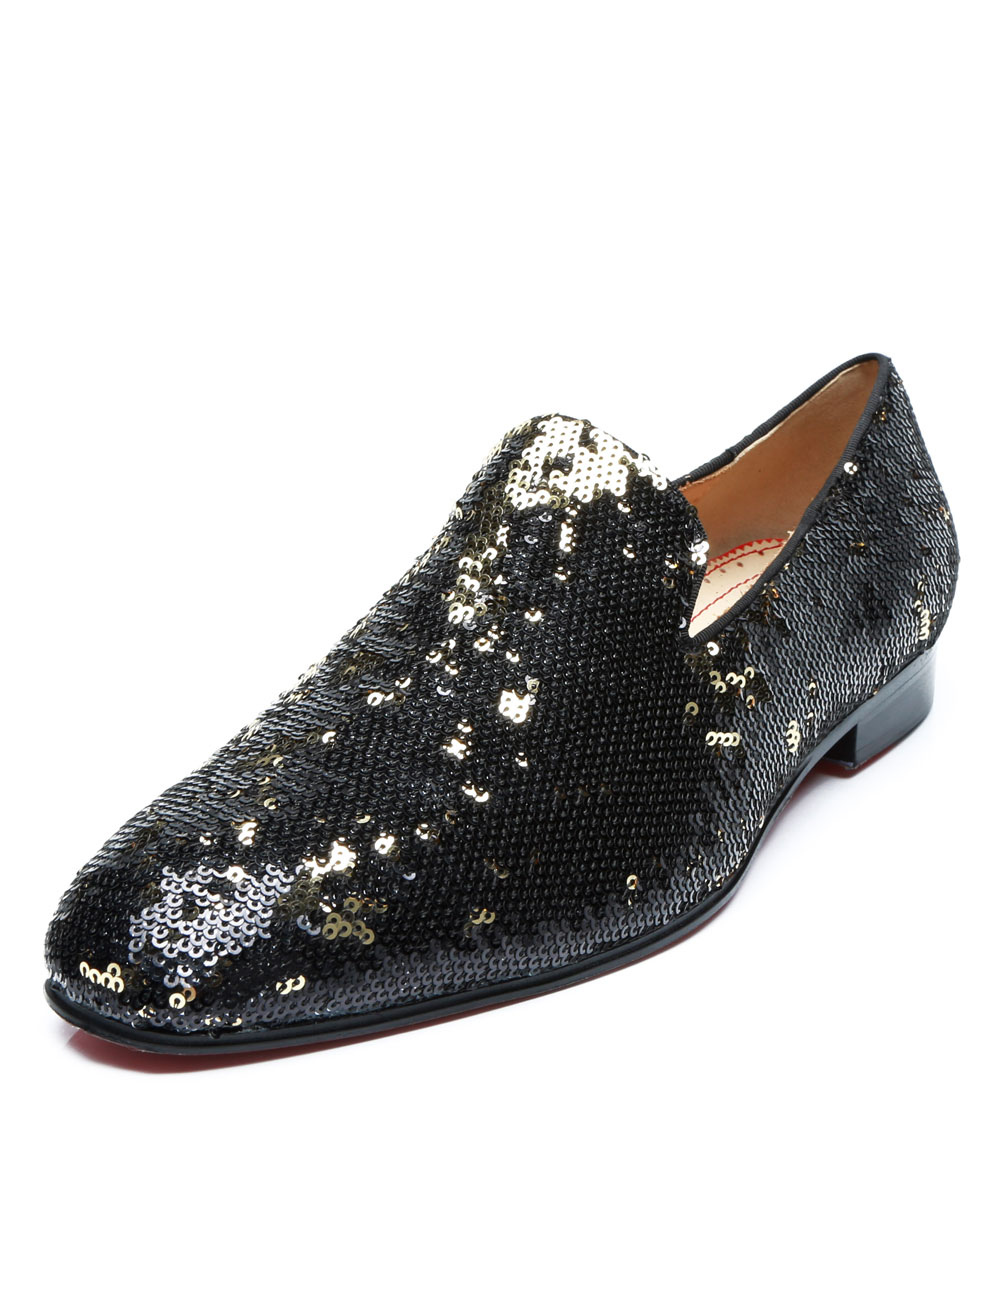 Mens Black Dress Loafers Shoes Sequined 